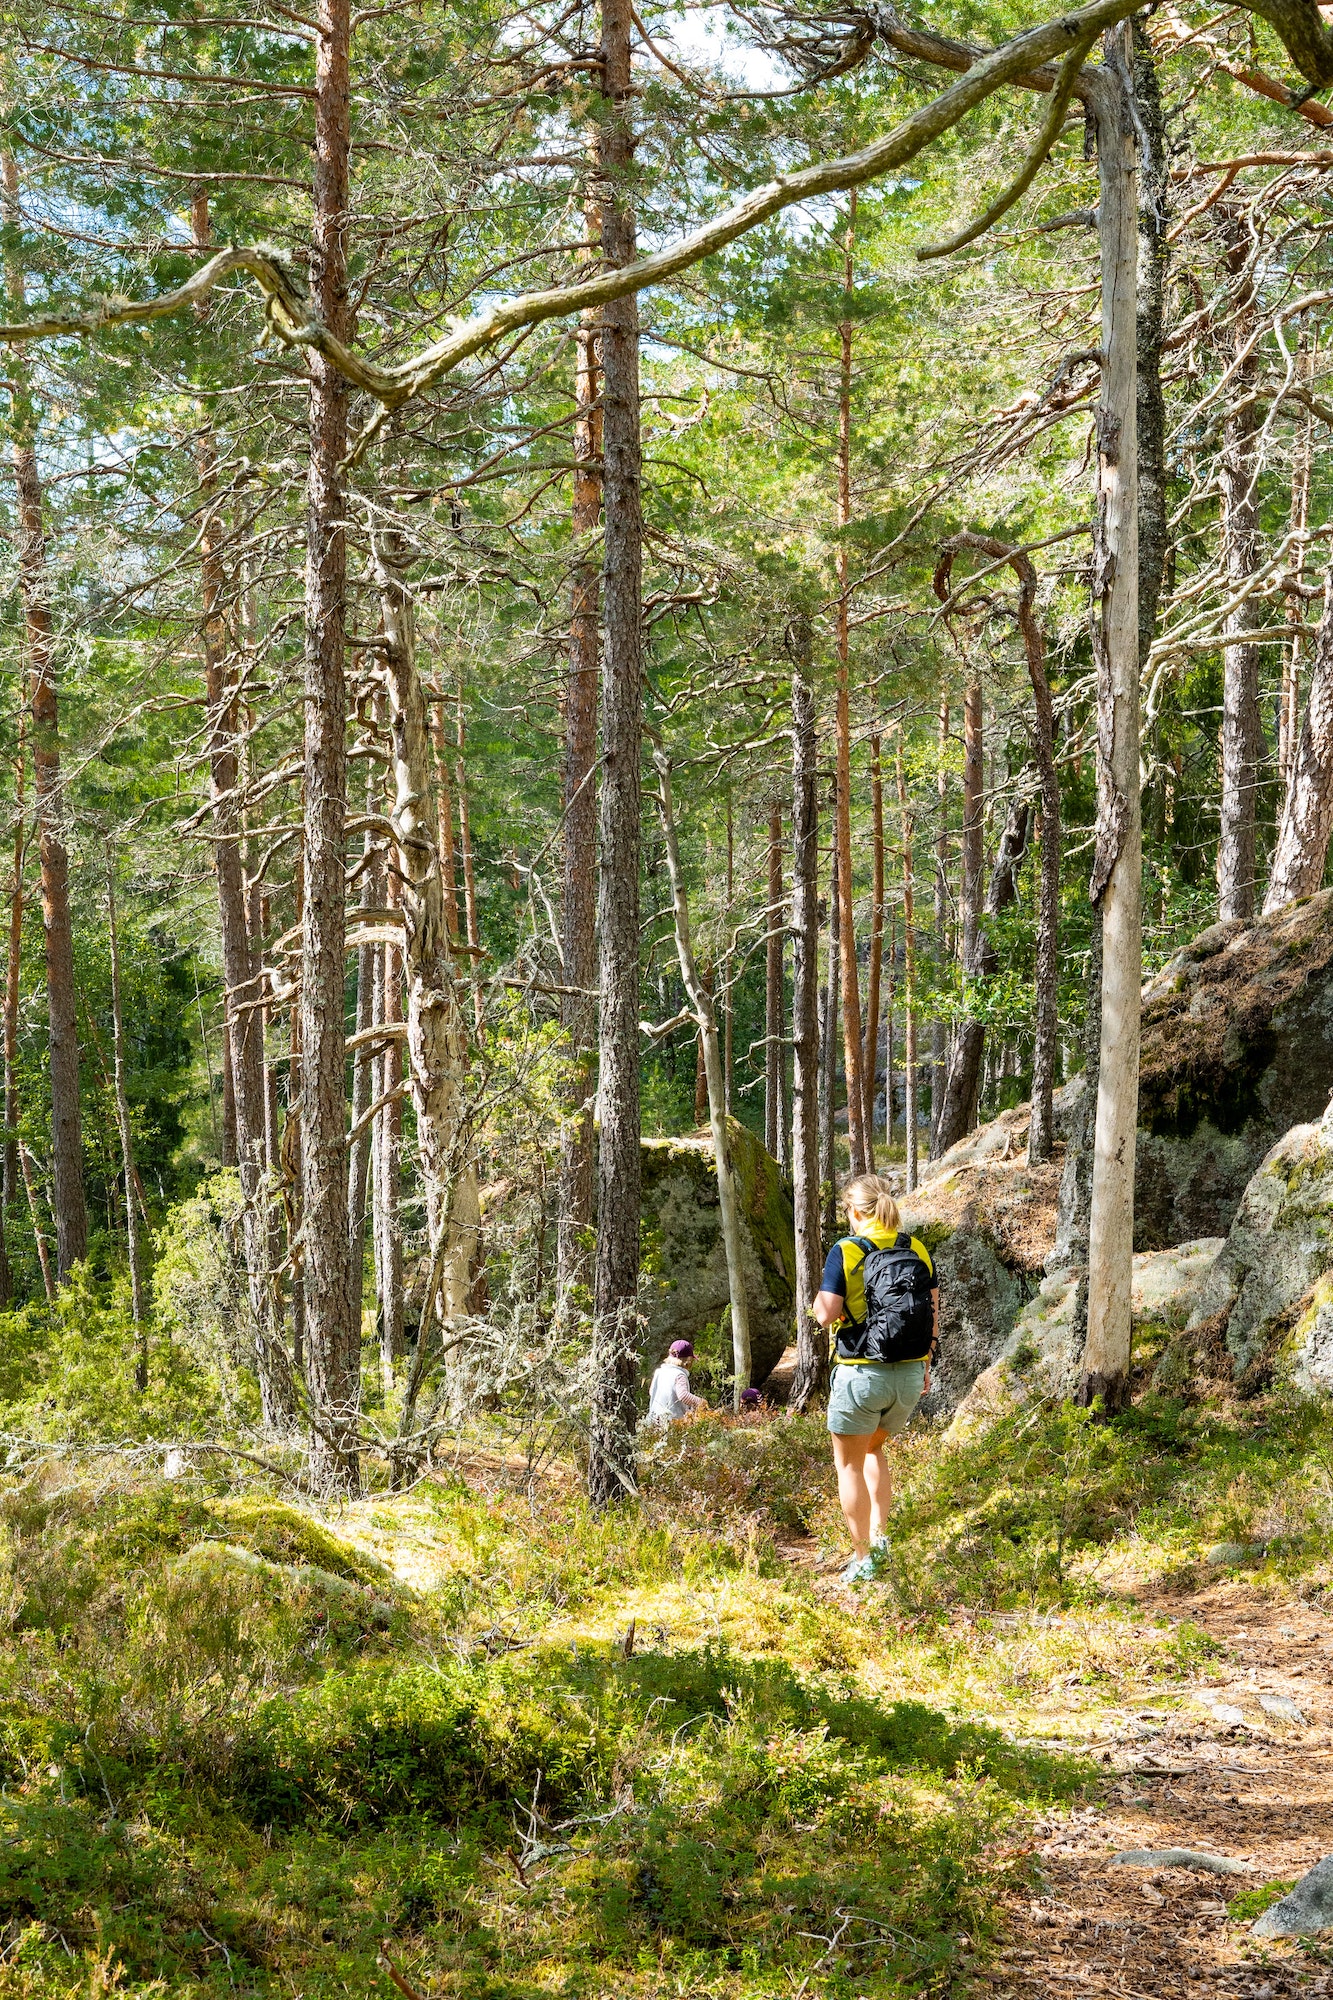 Vertical shot of hiking people on walkway surrounded by dense woods